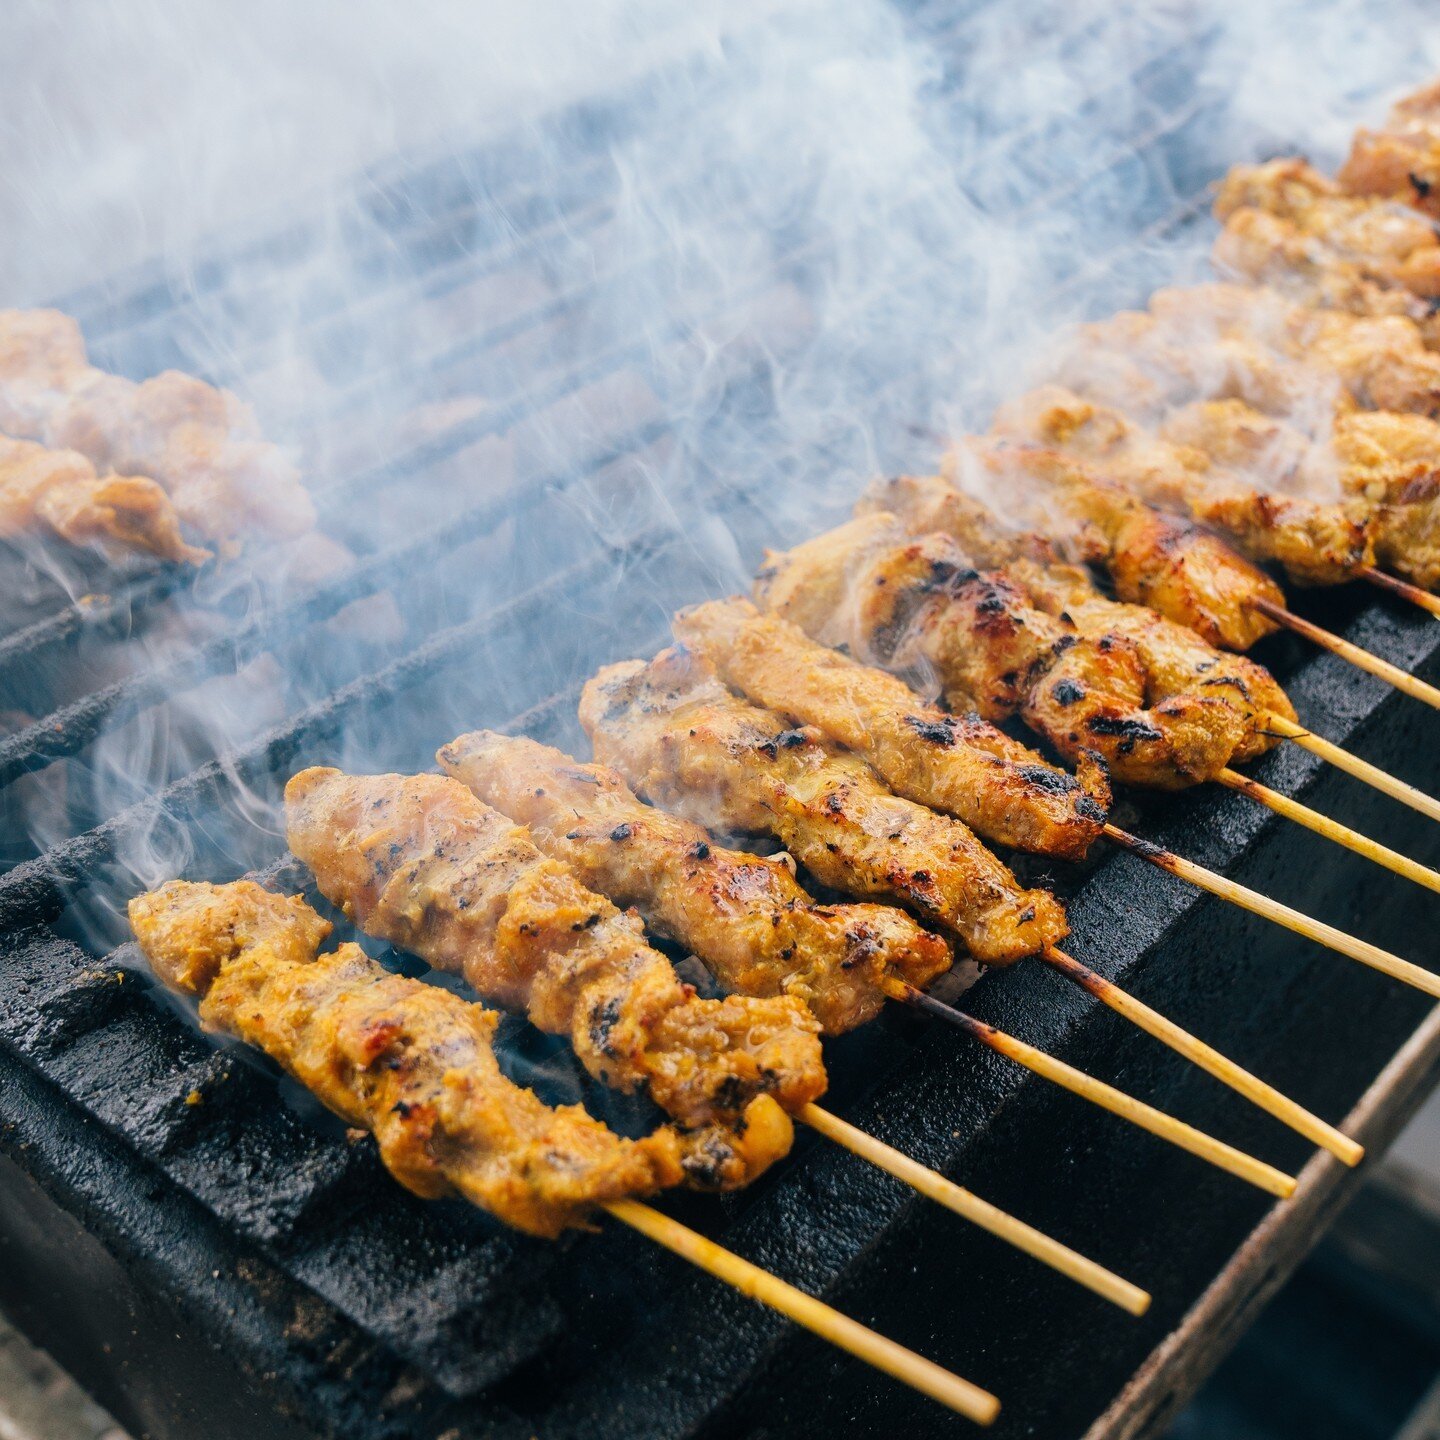 This cool weather calls for hot satay from @bungarayasatayperth!⁠
⁠
We're in Scarbs today from 3pm, hit the link in our bio and check out all the delicious foodies joining us 👆⁠
⁠
Love the environment and leftovers? BYO containers, cups and cutlery 